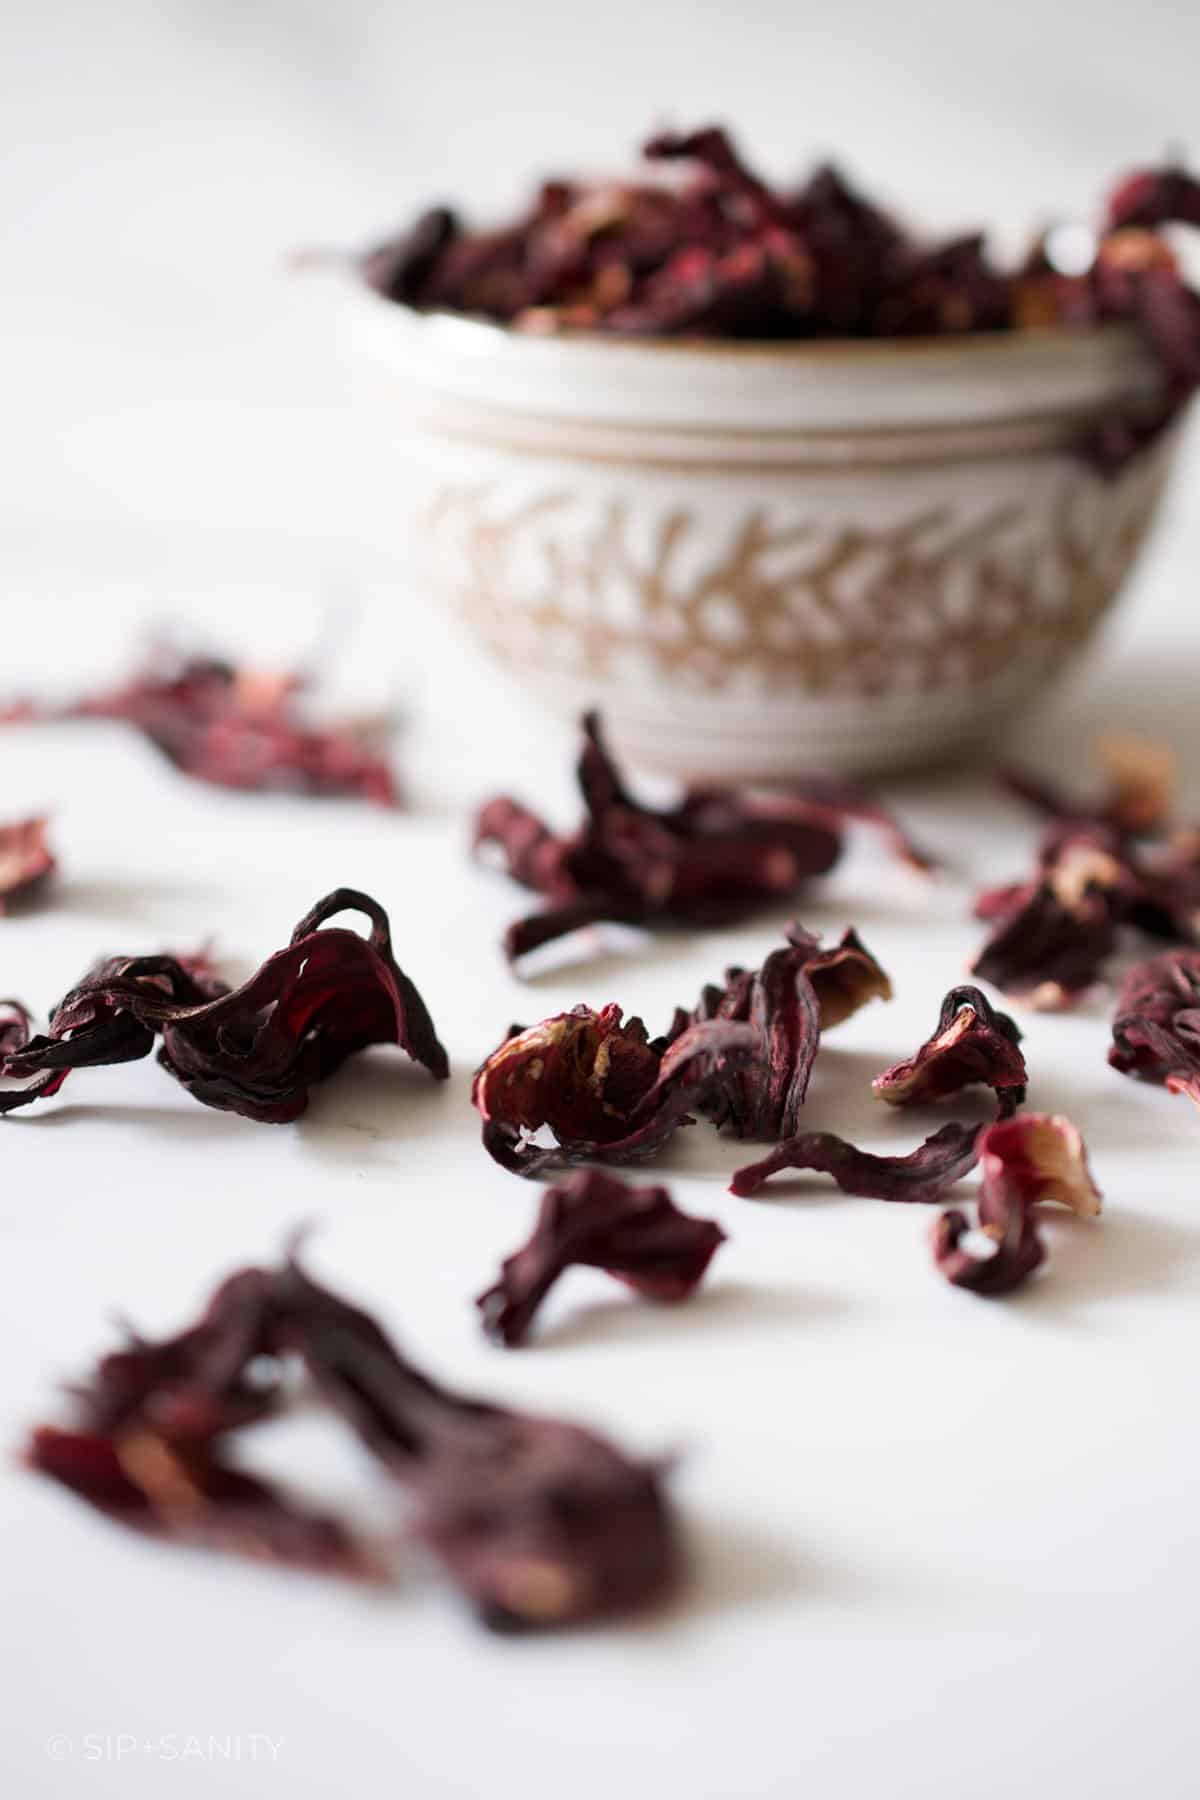 Dried hibiscus petals scattered on a white table.